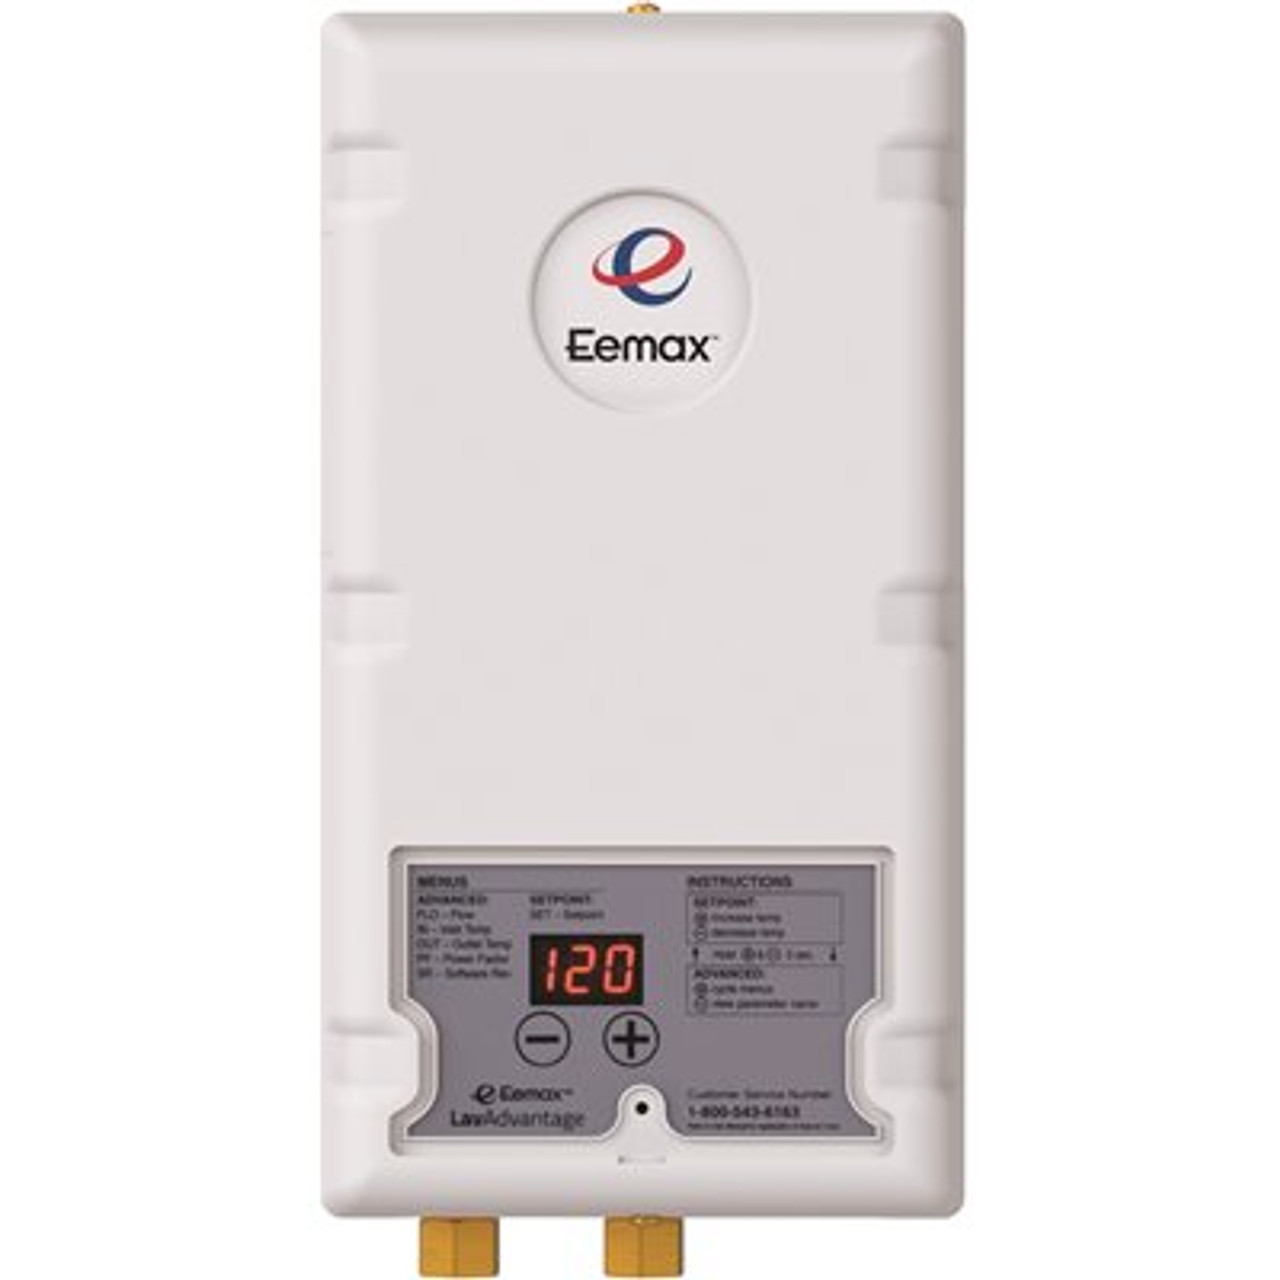 Eemax LavAdvantage 6.5 kW, 240 Volt Commercial Electric Tankless Water Heater, Thermostatic